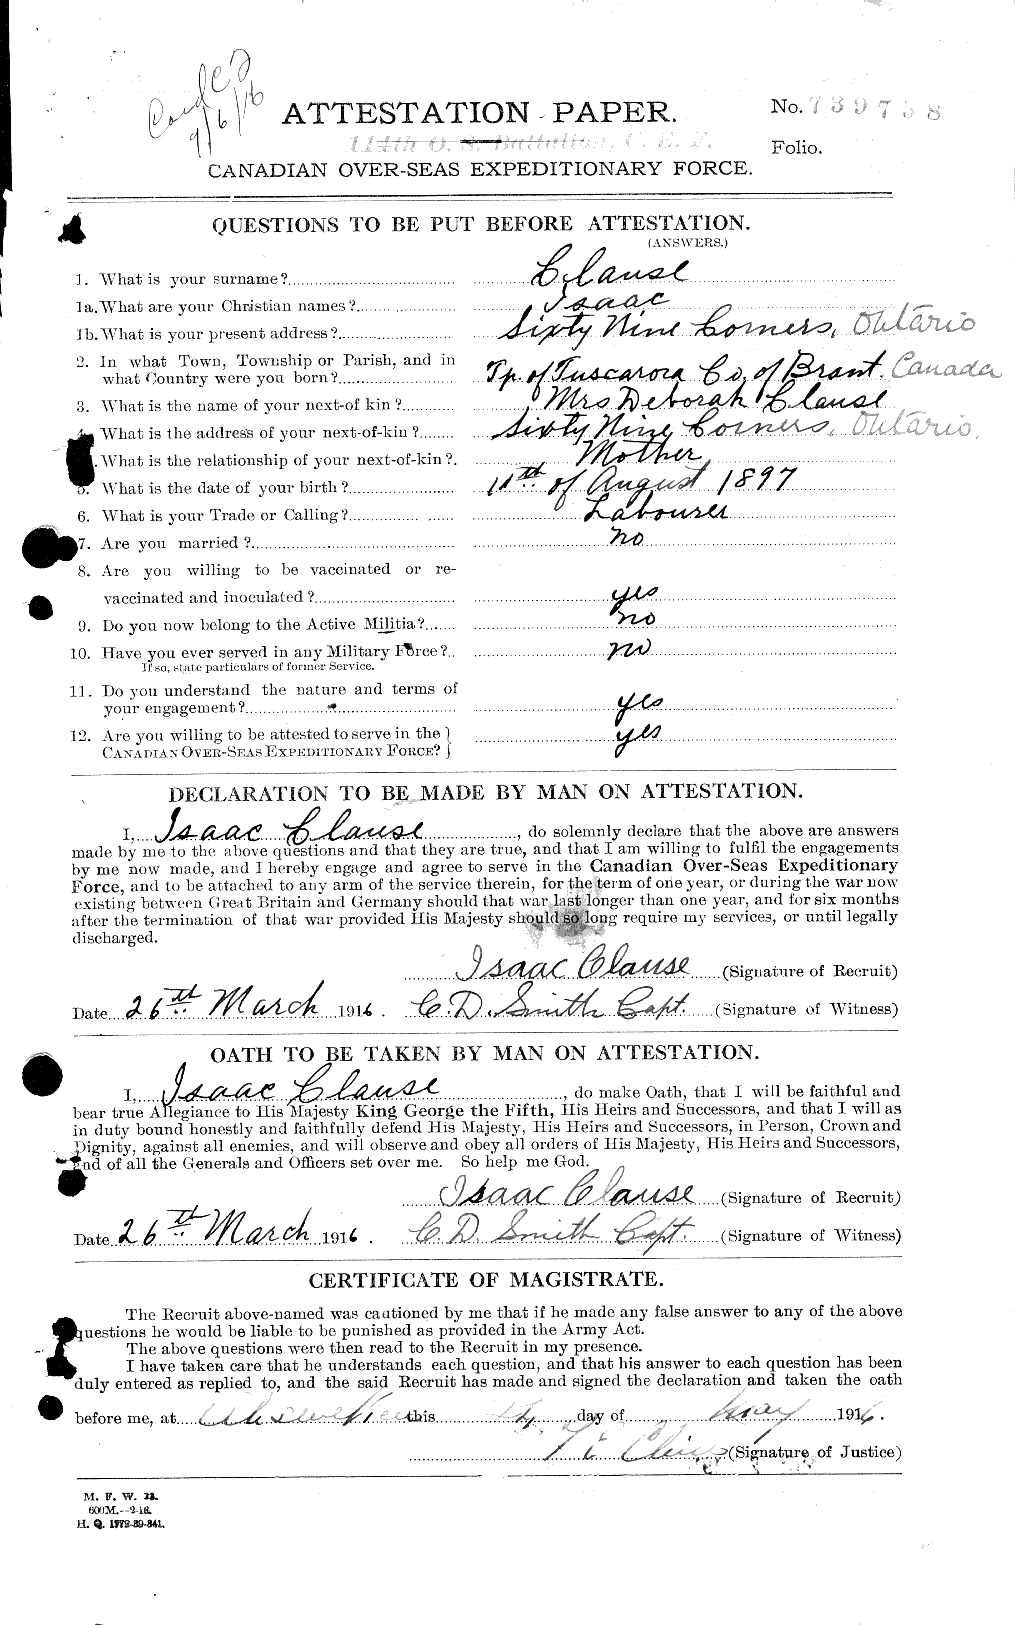 Personnel Records of the First World War - CEF 019069a